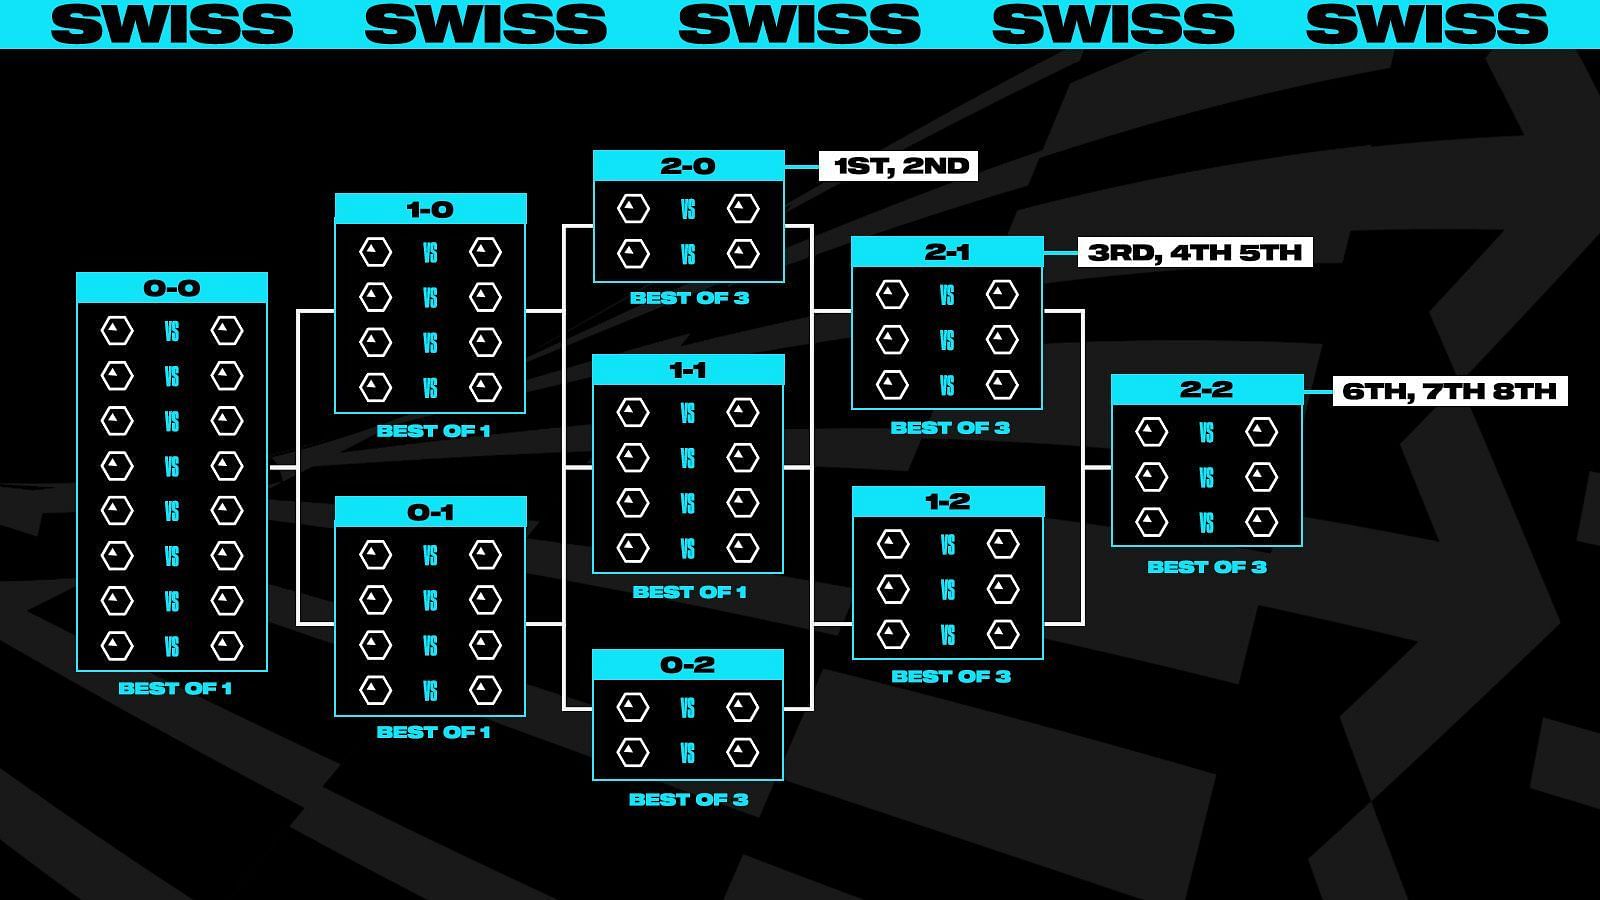 Swiss Stage (Image via Riot Games)